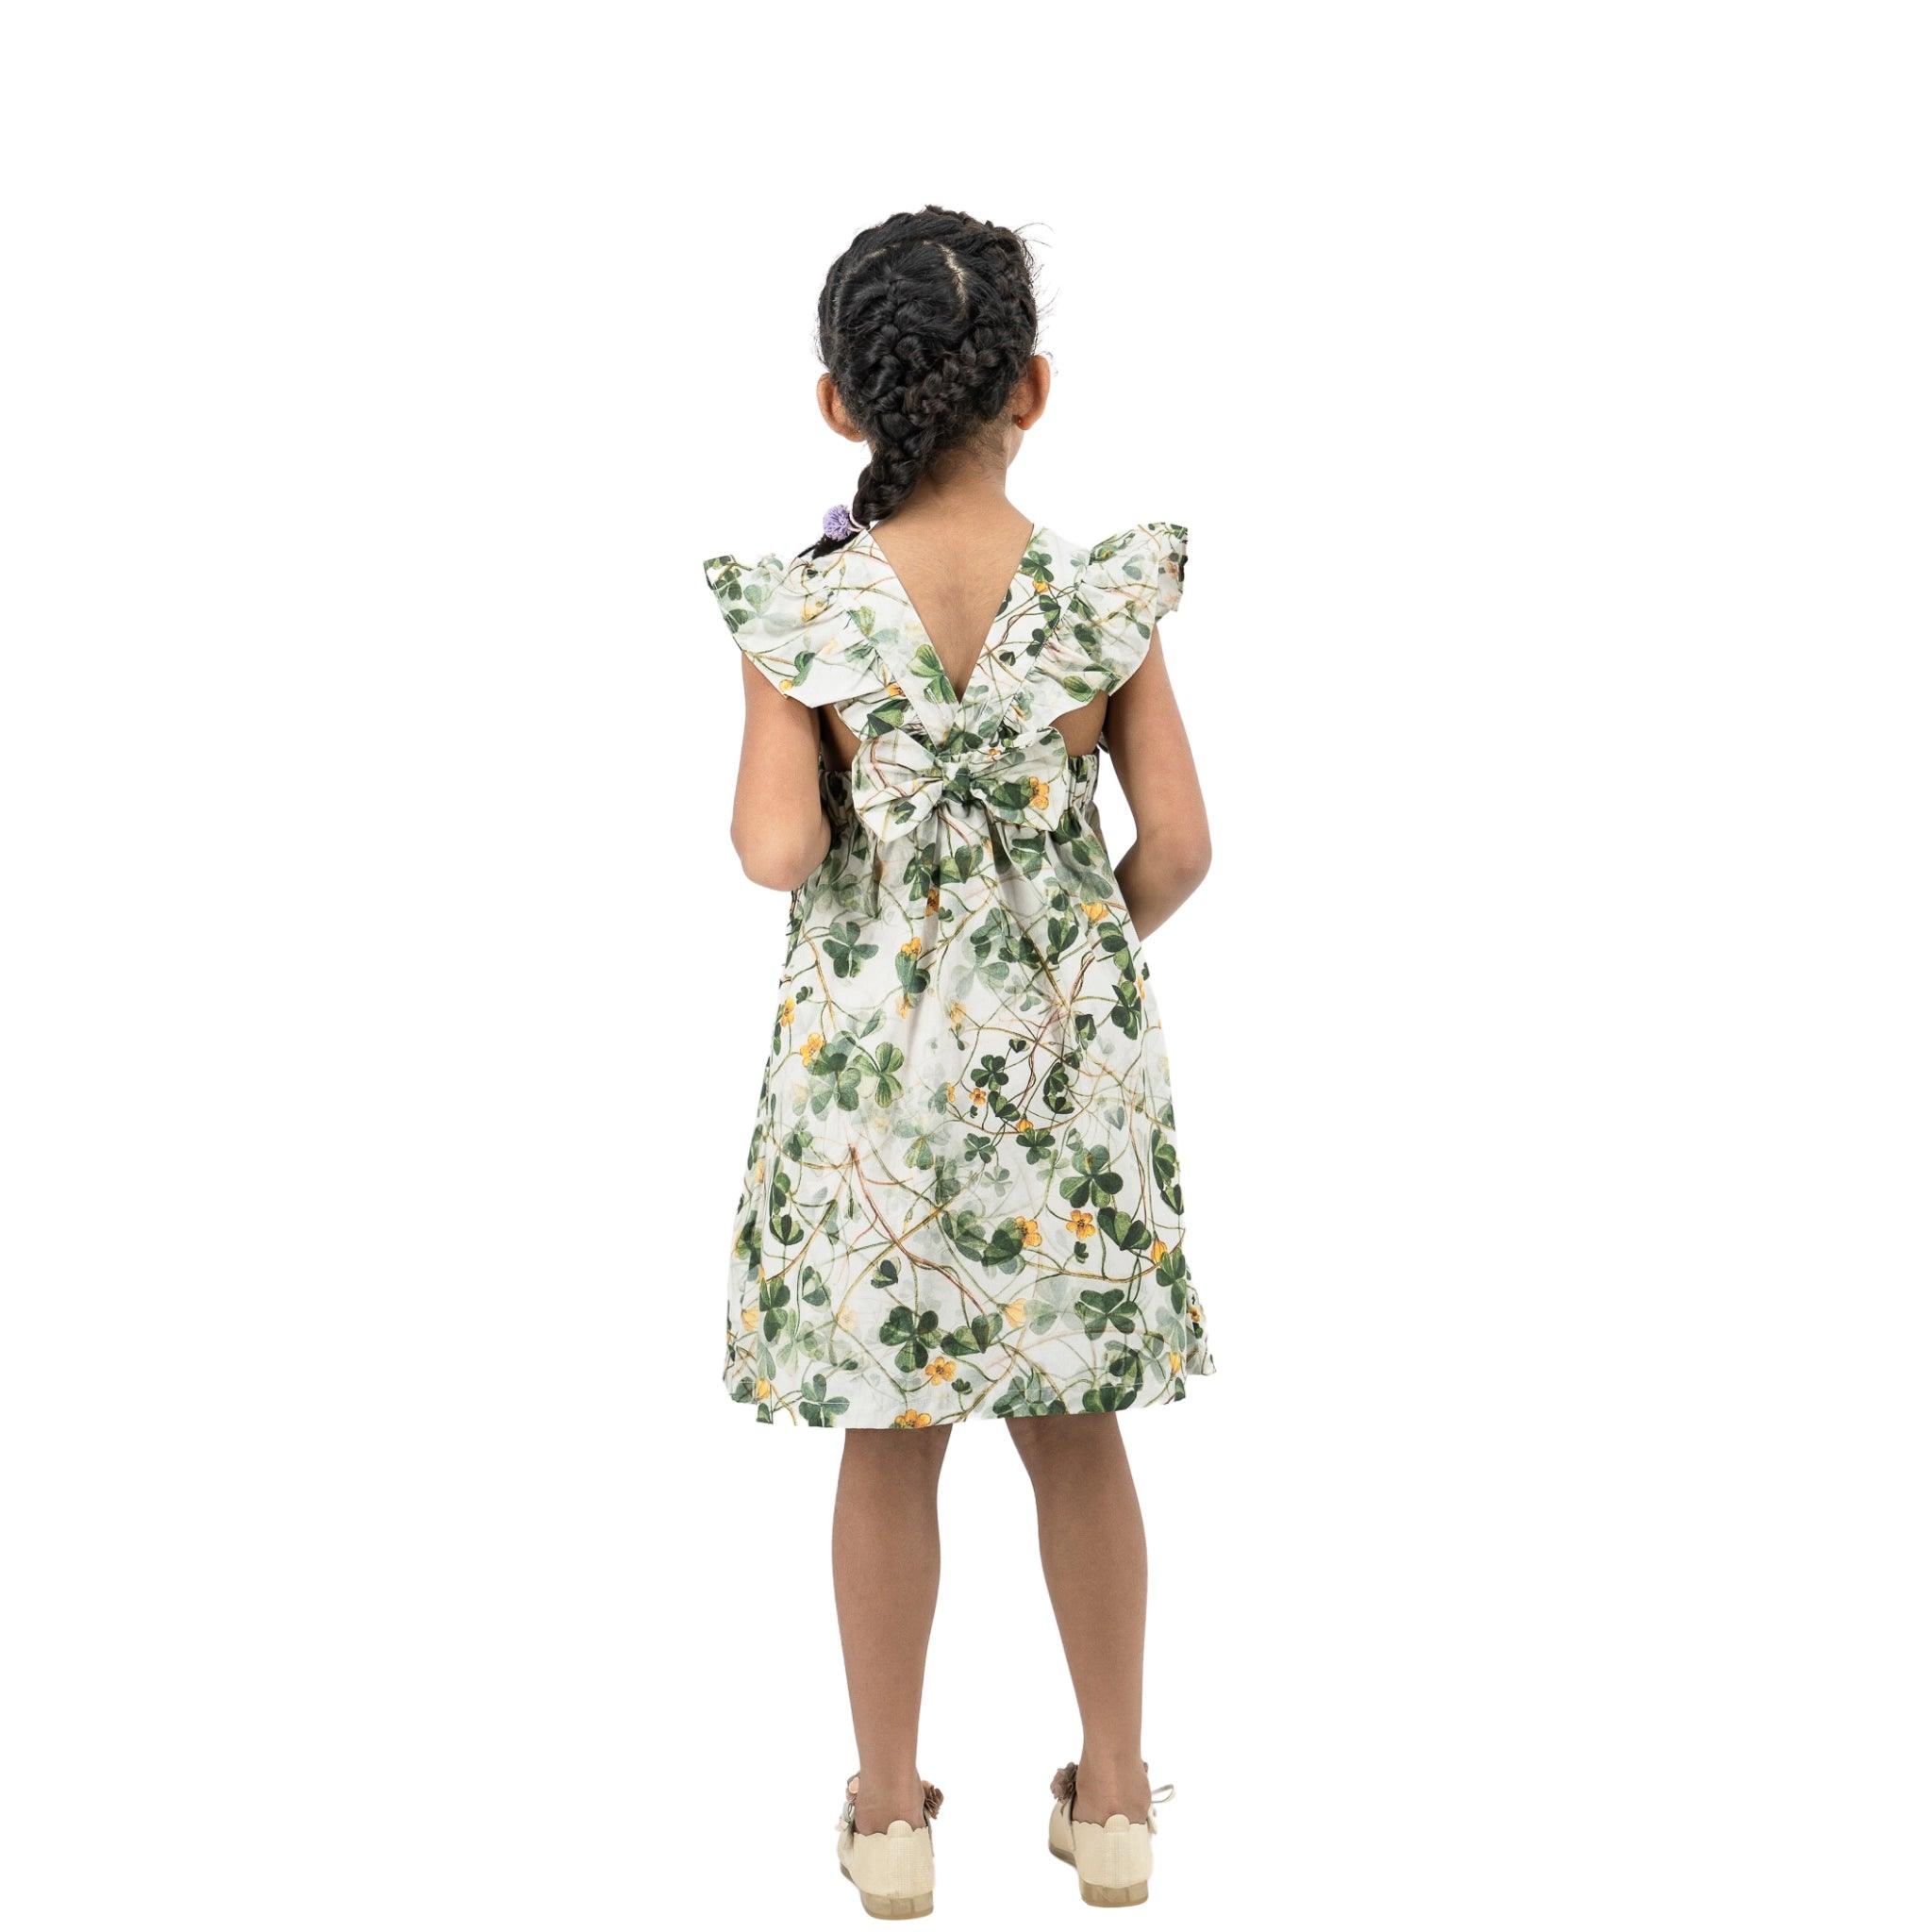 Young girl seen from behind, wearing a Karee green floral cotton dress with ruffled sleeves and braided hair, standing against a white background.